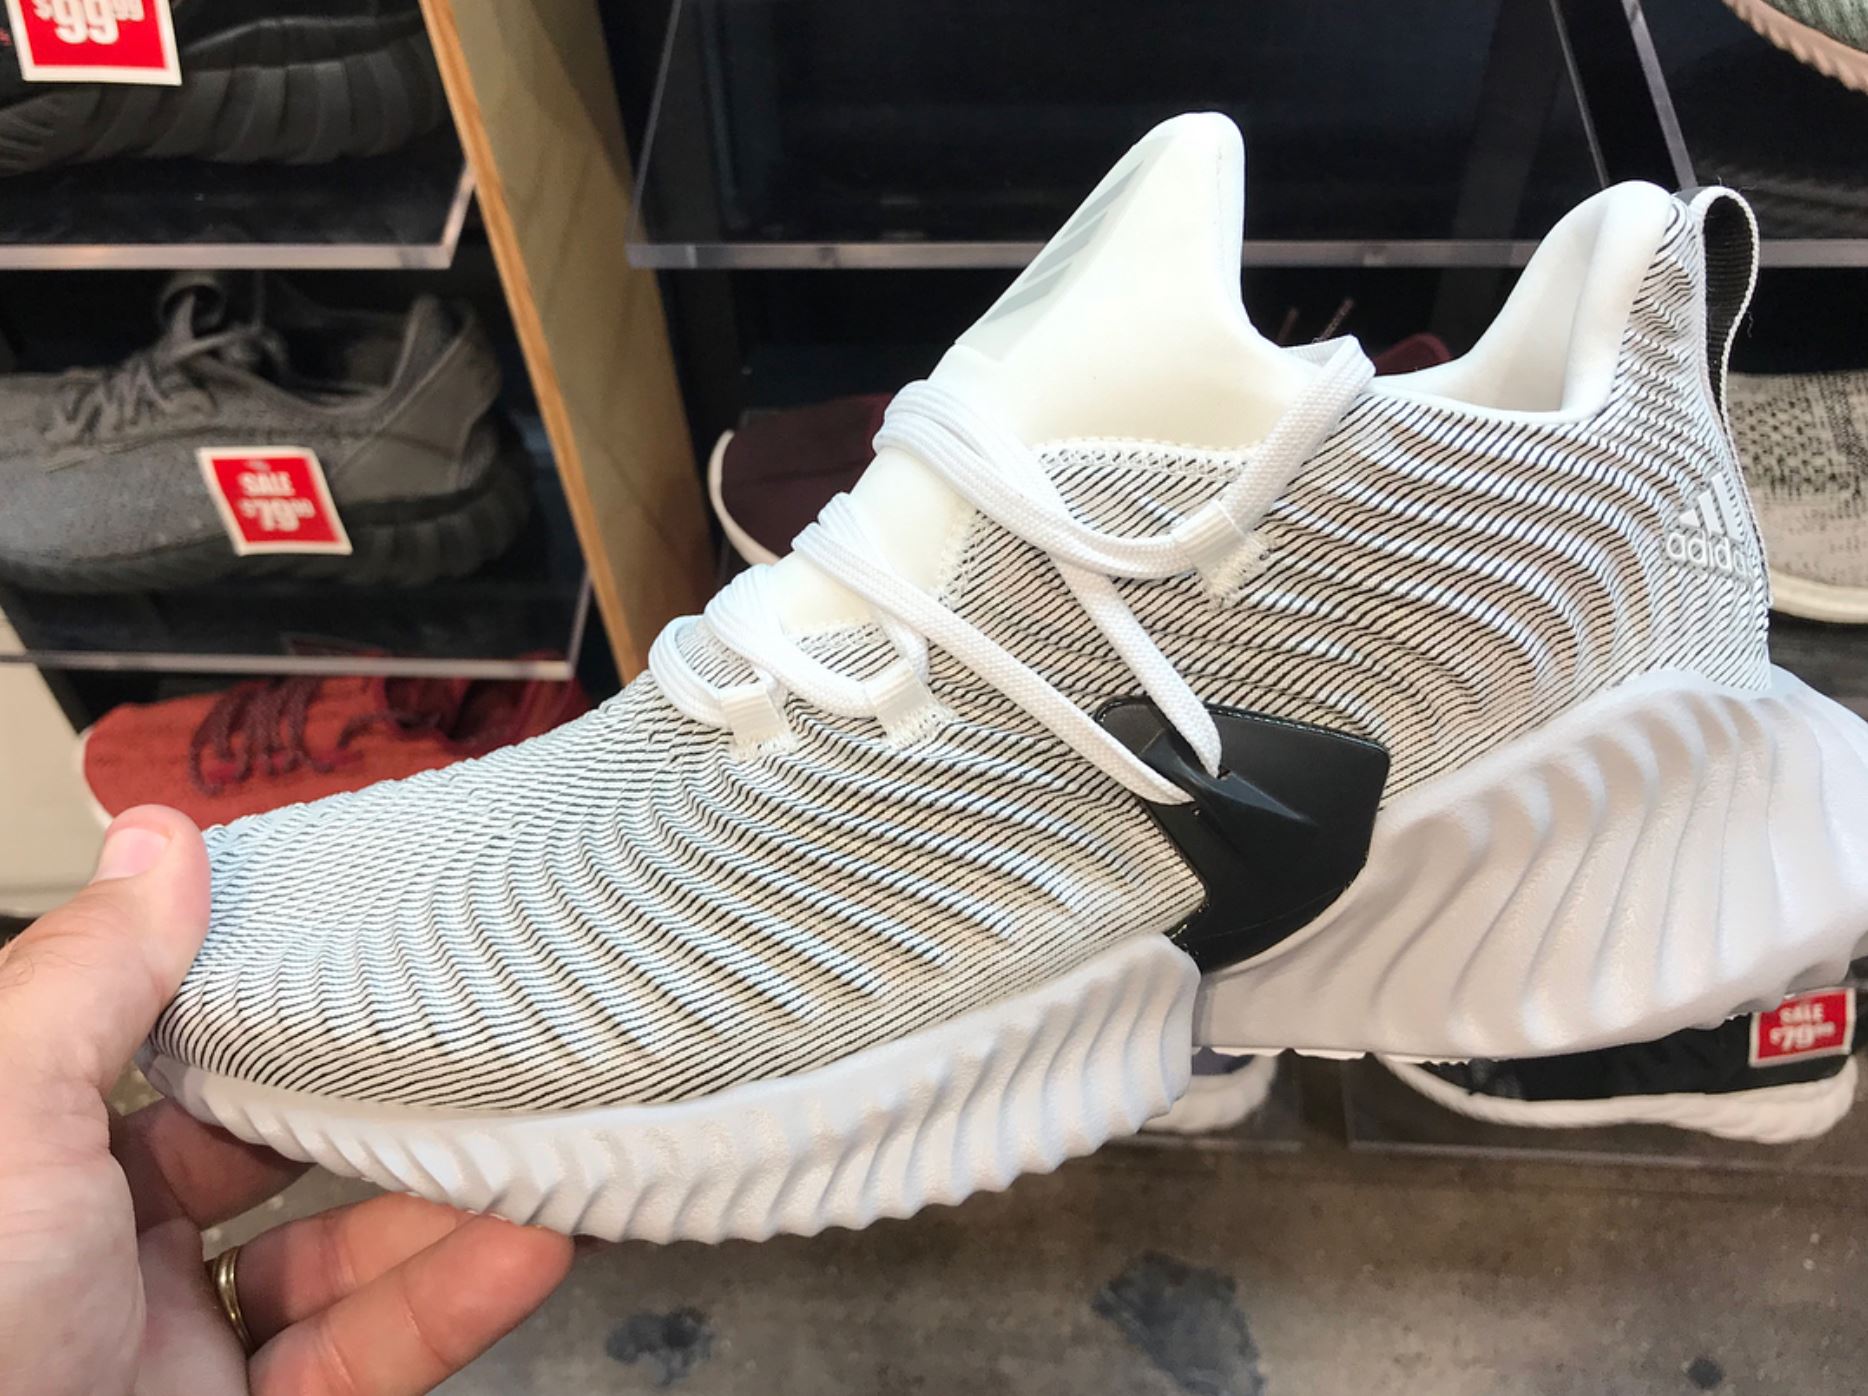 visa processing Employee The adidas AlphaBounce Instinct Offers an Aggressive Look and Bounce  Cushioning - WearTesters